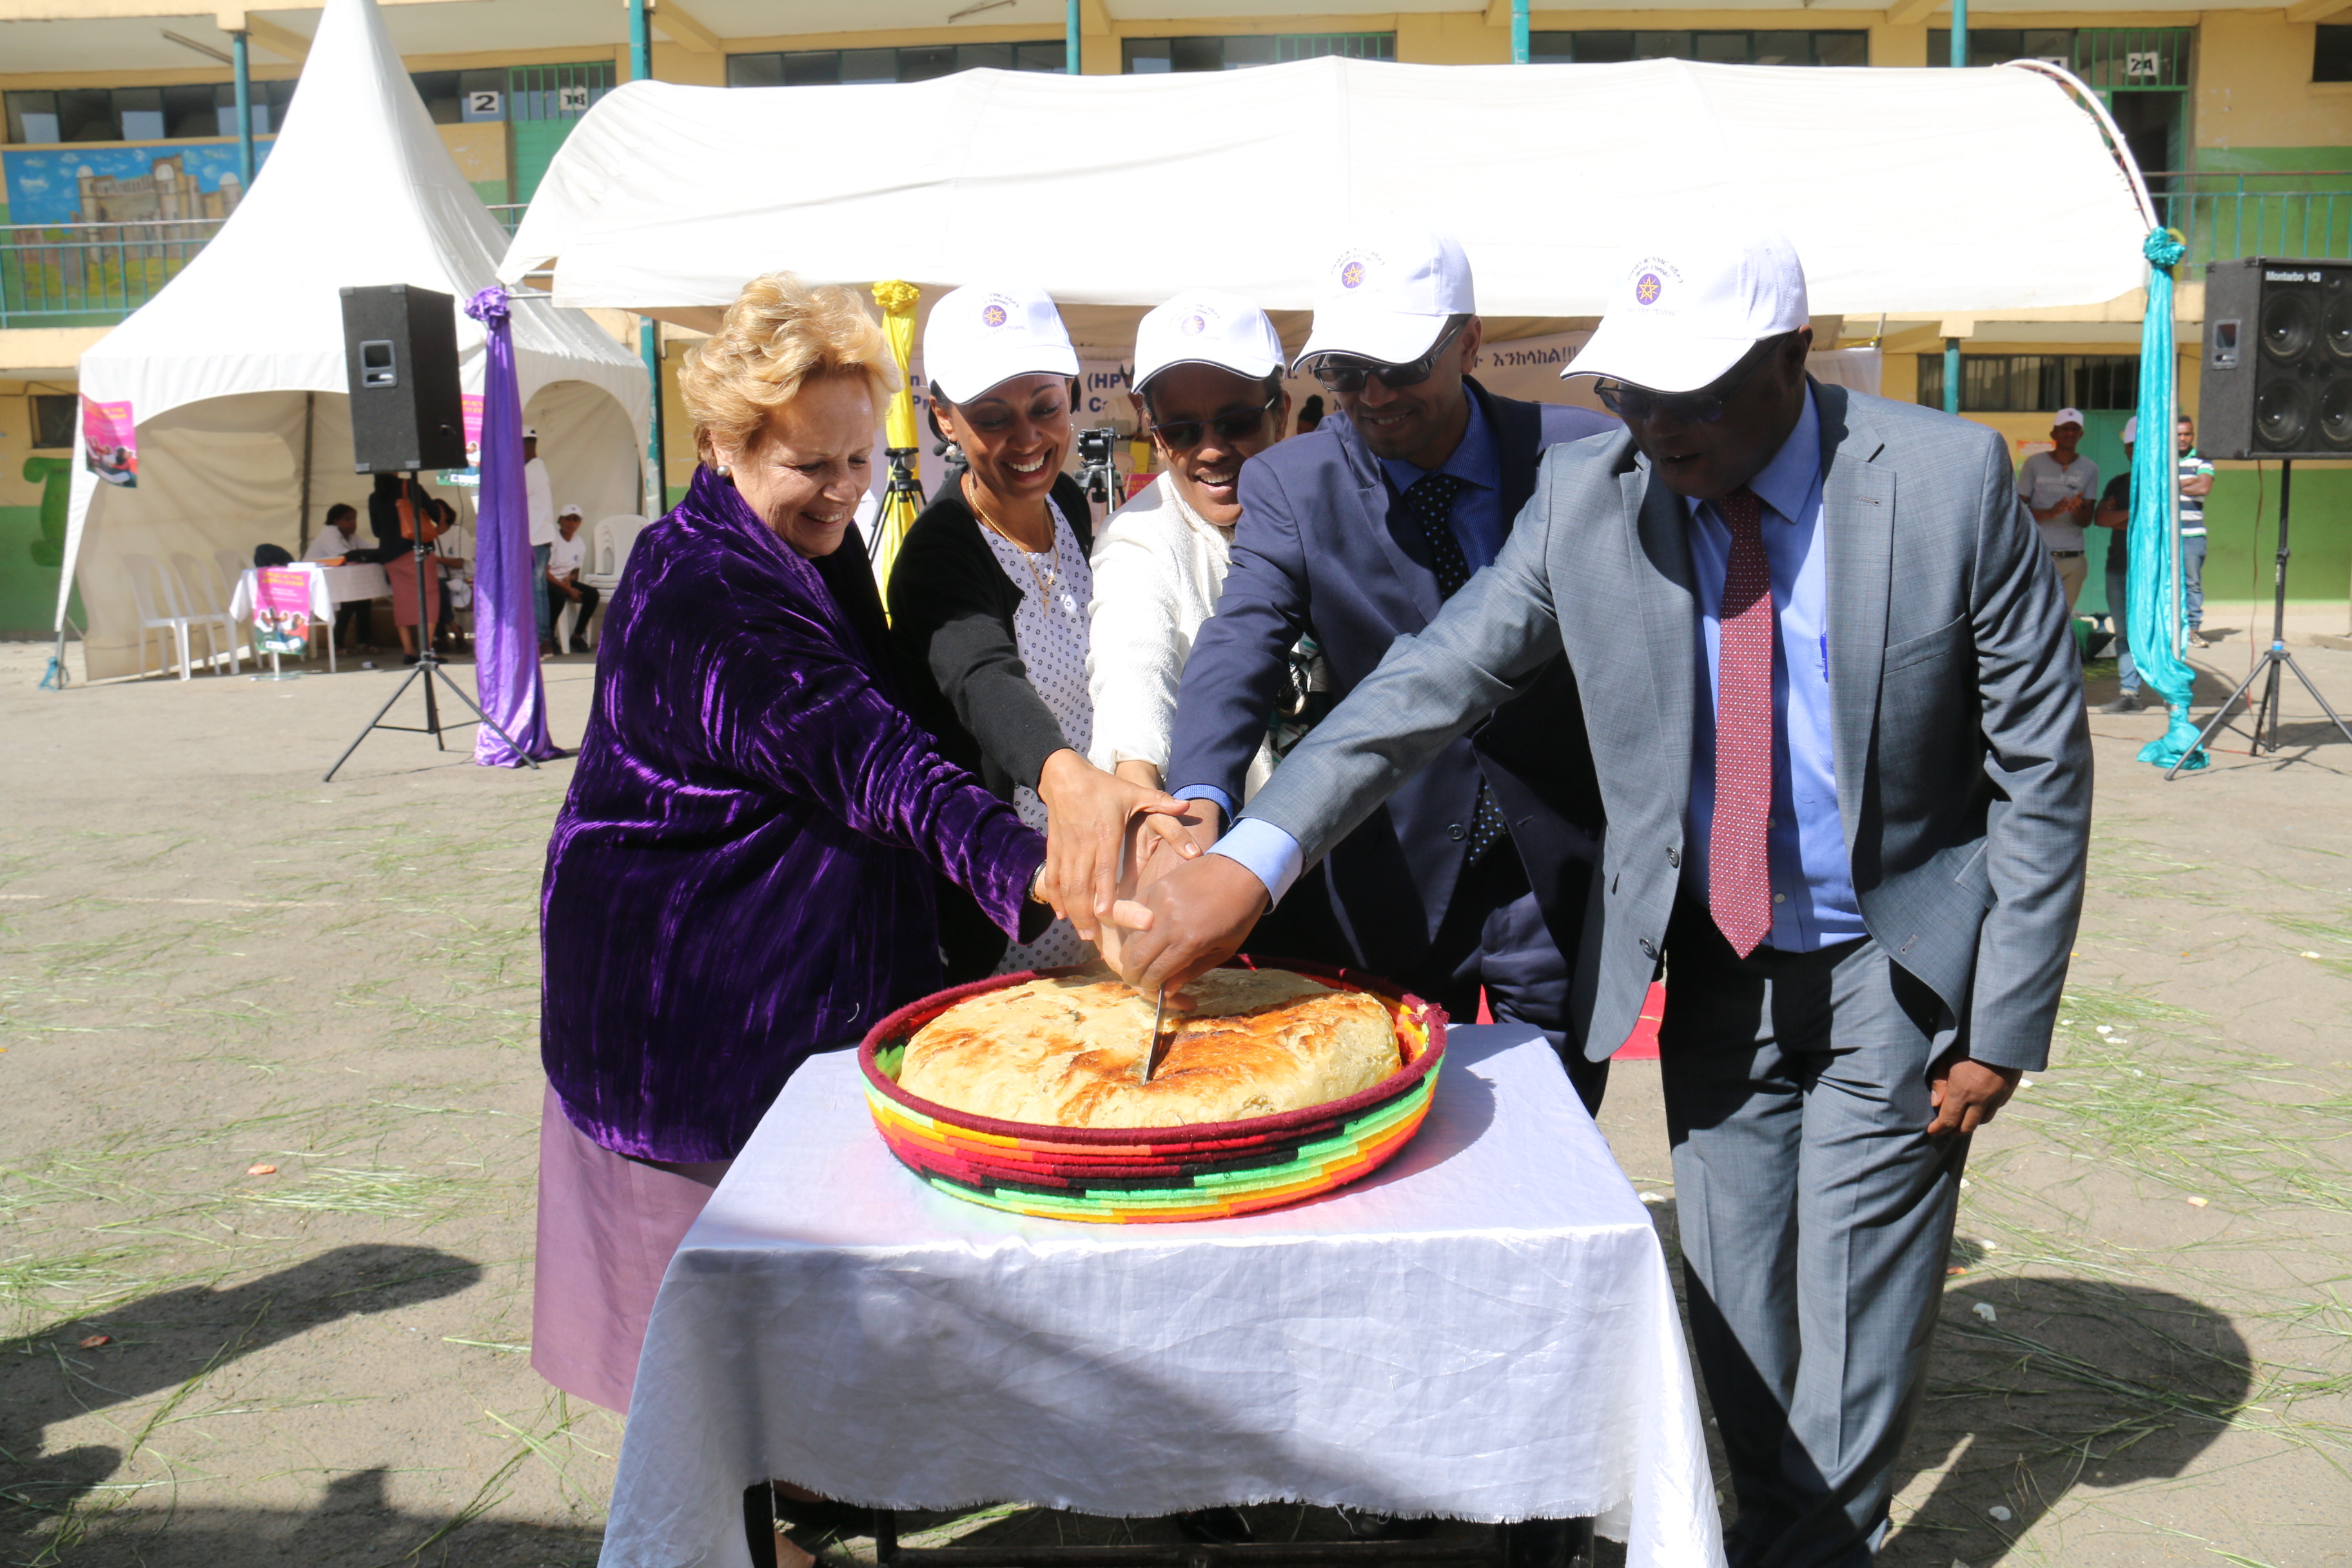 R to L: Paul Mainuka, WHO Representative a.i., H.E. Dr Amir Aman, Minister to MoH, Mrs Roman Tesfaye, Former First Lady, Dr Liya Tadesse, State Minister of MoH, Ms Gillian Mellsop, cutting the bread during the HPV launch